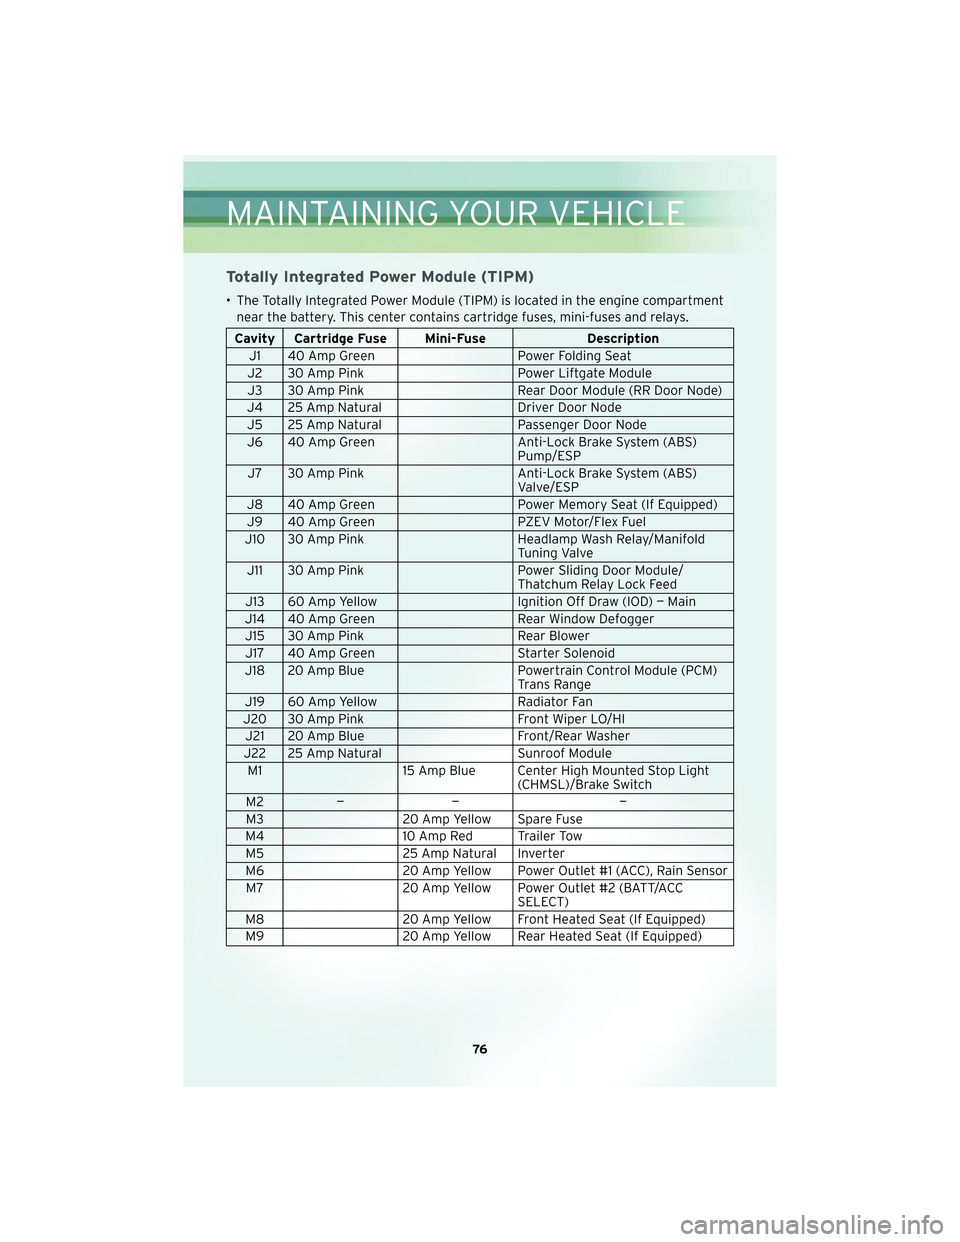 CHRYSLER TOWN AND COUNTRY 2010 5.G User Guide Totally Integrated Power Module (TIPM)
• The Totally Integrated Power Module (TIPM) is located in the engine compartmentnear the battery. This center contains cartridge fuses, mini-fuses and relays.